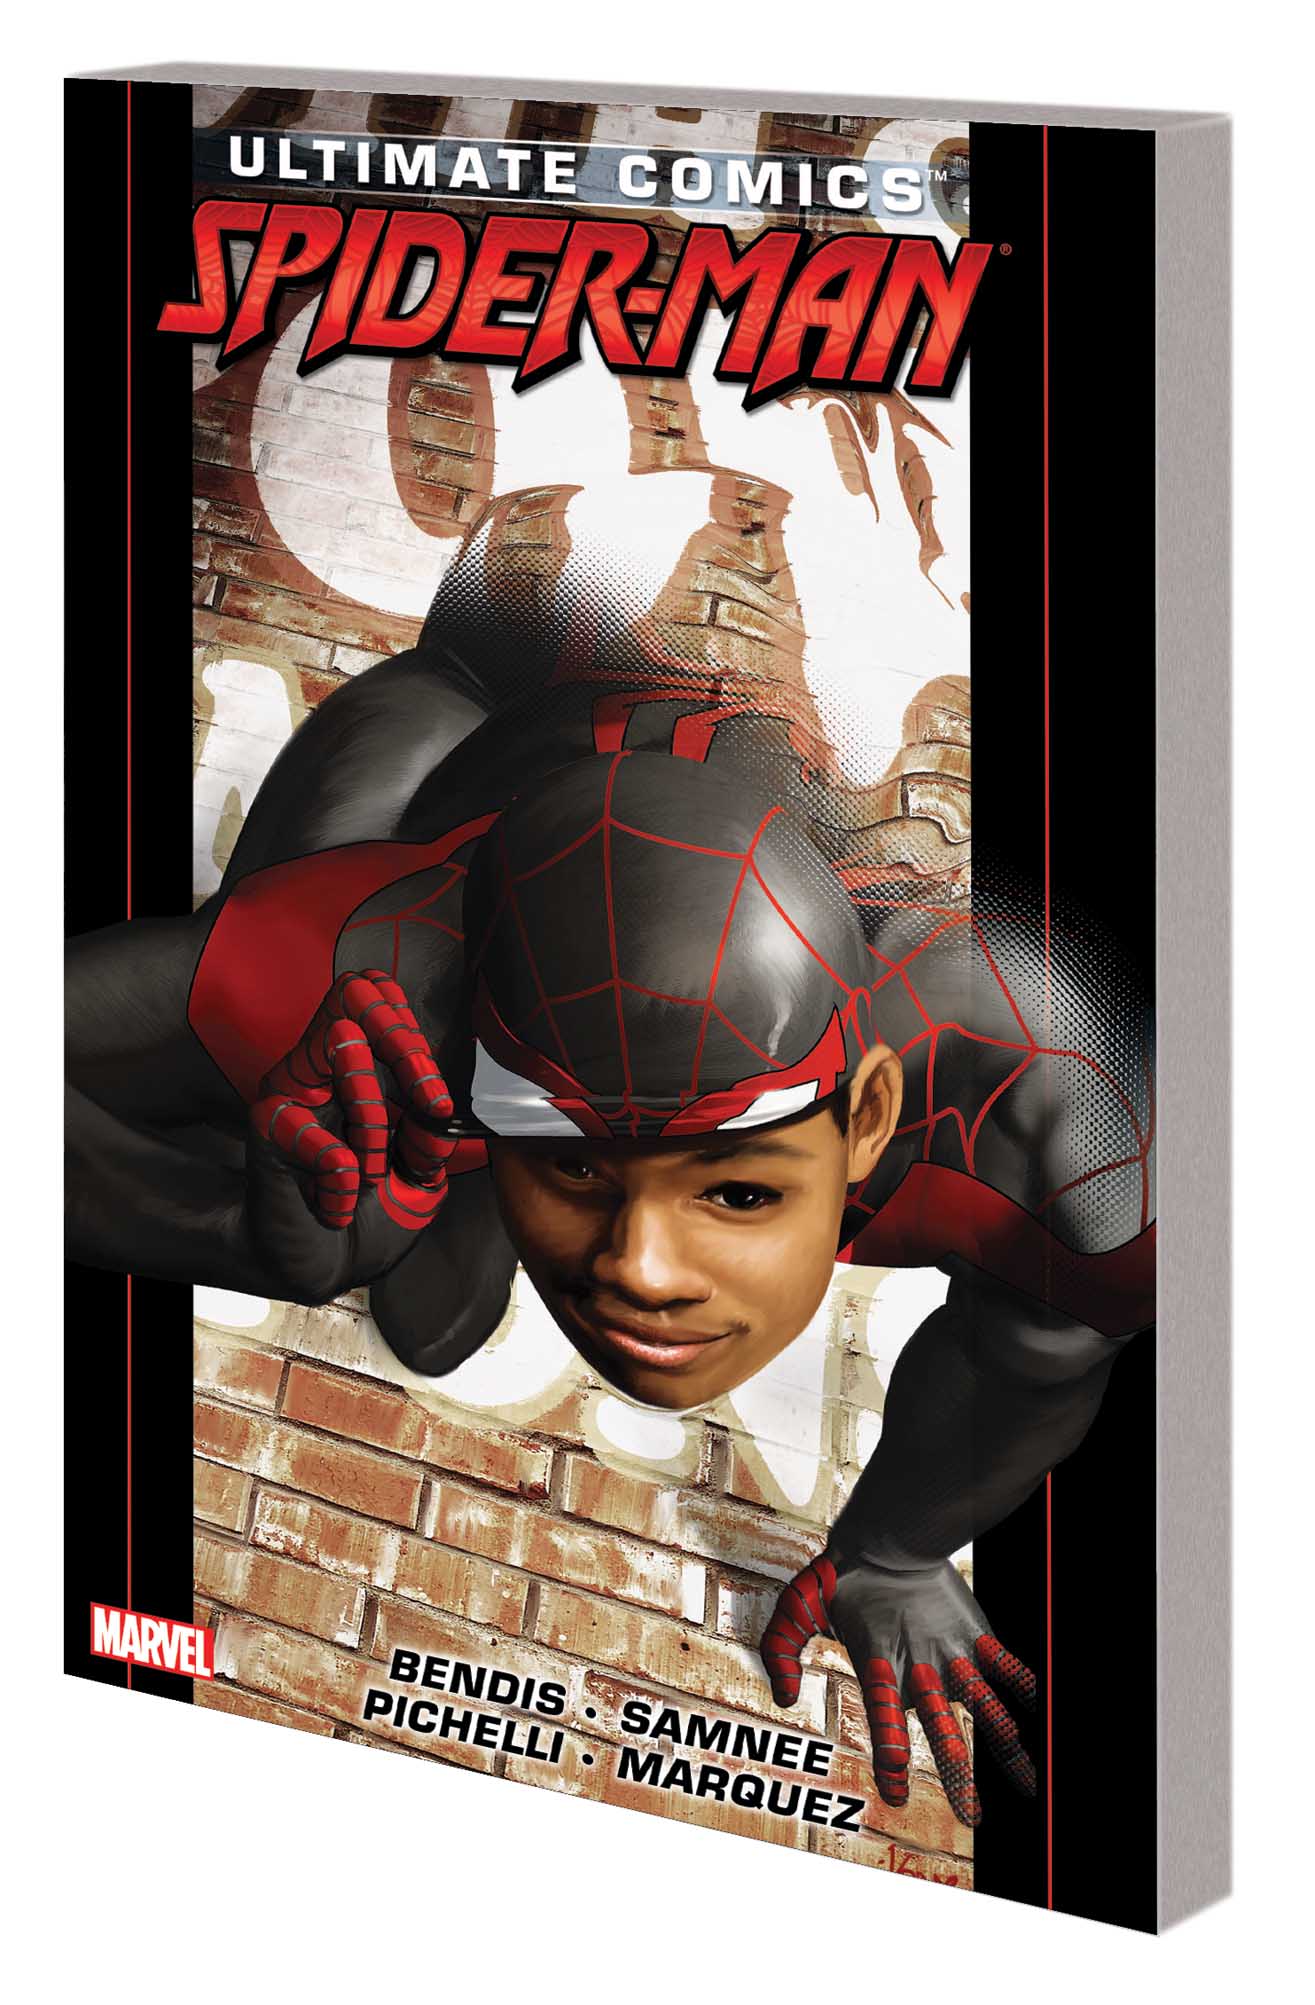 Ultimate Comics Spider-Man (Issues 7-12) (Trade Paperback)